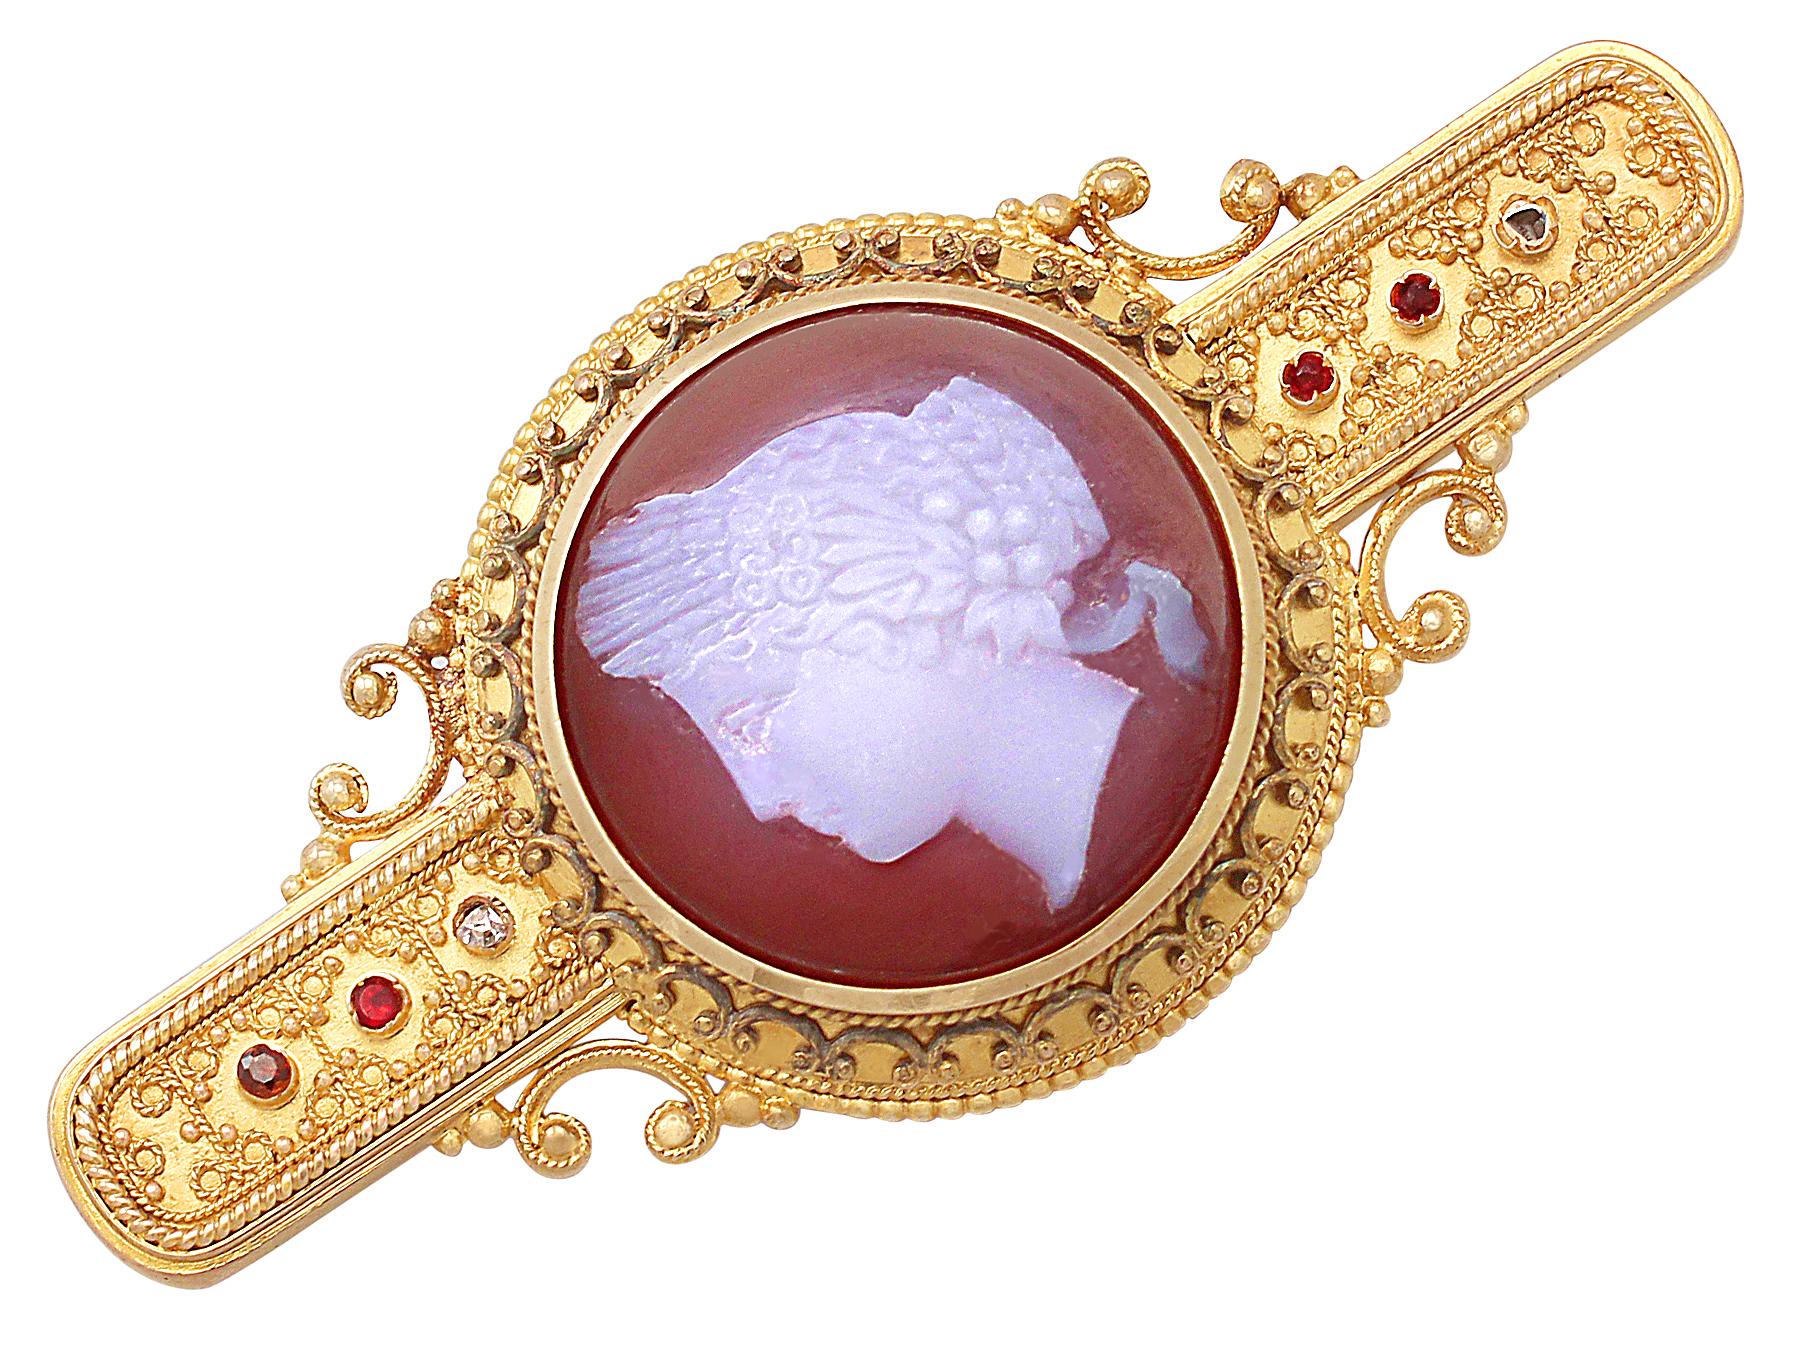 A fine and impressive antique Victorian cameo brooch/locket, in 14 karat yellow gold; part of our antique jewelry and estate jewelry collections.

This fine antique cameo brooch has been crafted in 14k yellow gold with a hardstone cameo.

The